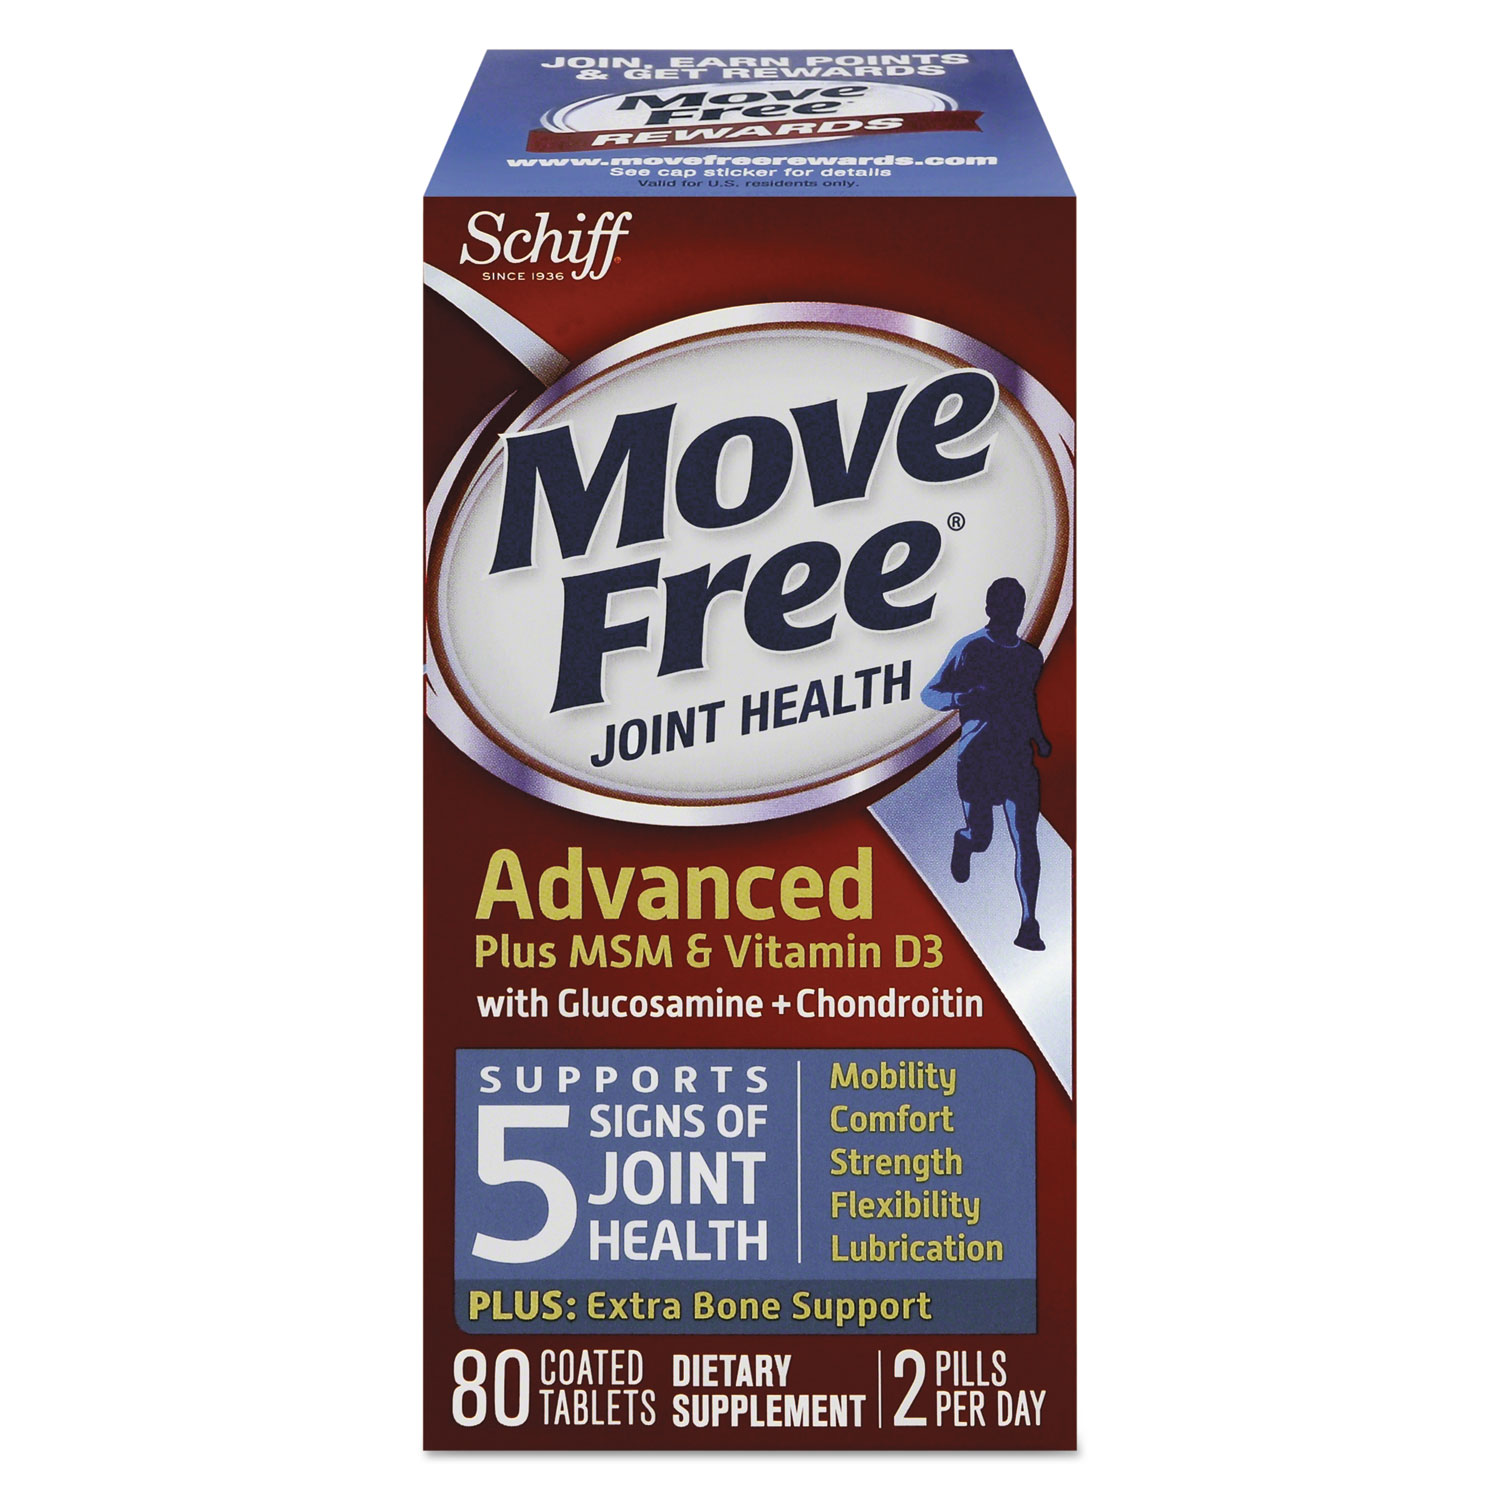  Move Free 20525-97007 Move Free Advanced Plus MSM & Vitamin D3 Joint Health Tablet, 80 Count, 12/Ctn (MOV97007CT) 